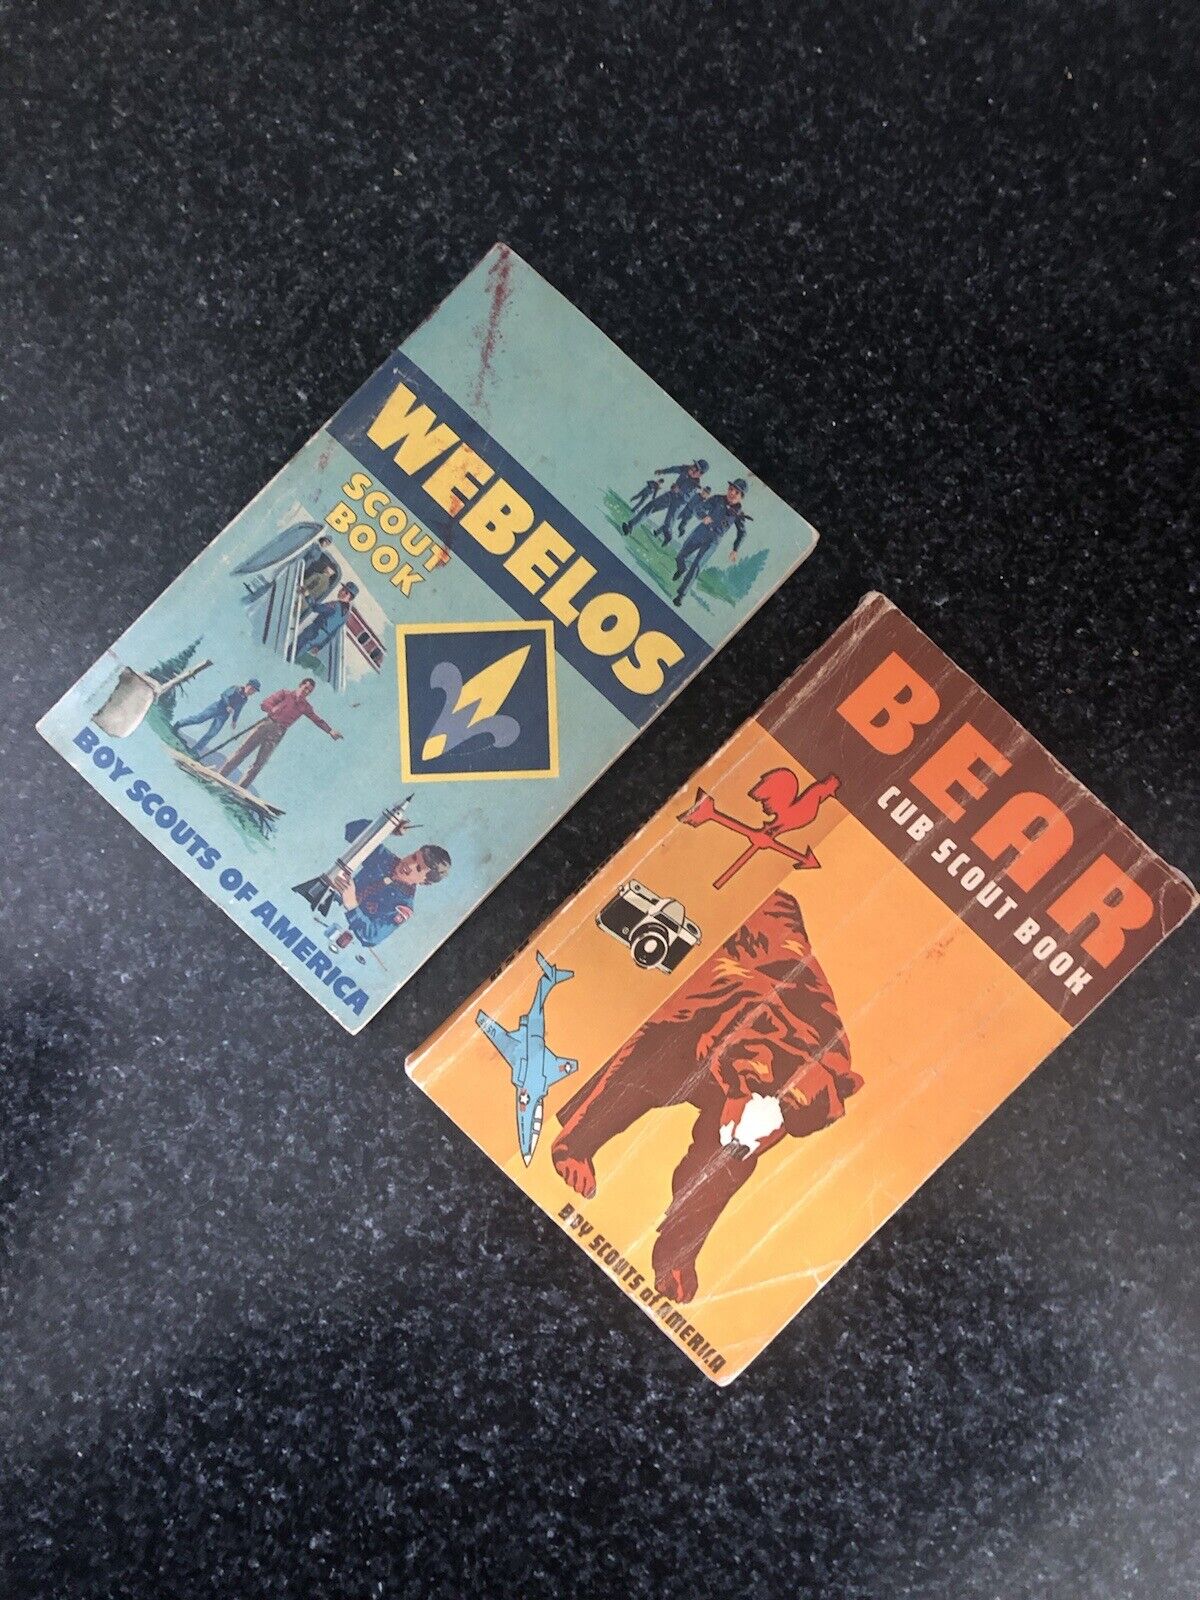 Vintage Boy Cub Scout Bear and Webelos Books 1960’s Outdoors Homestead Crafting